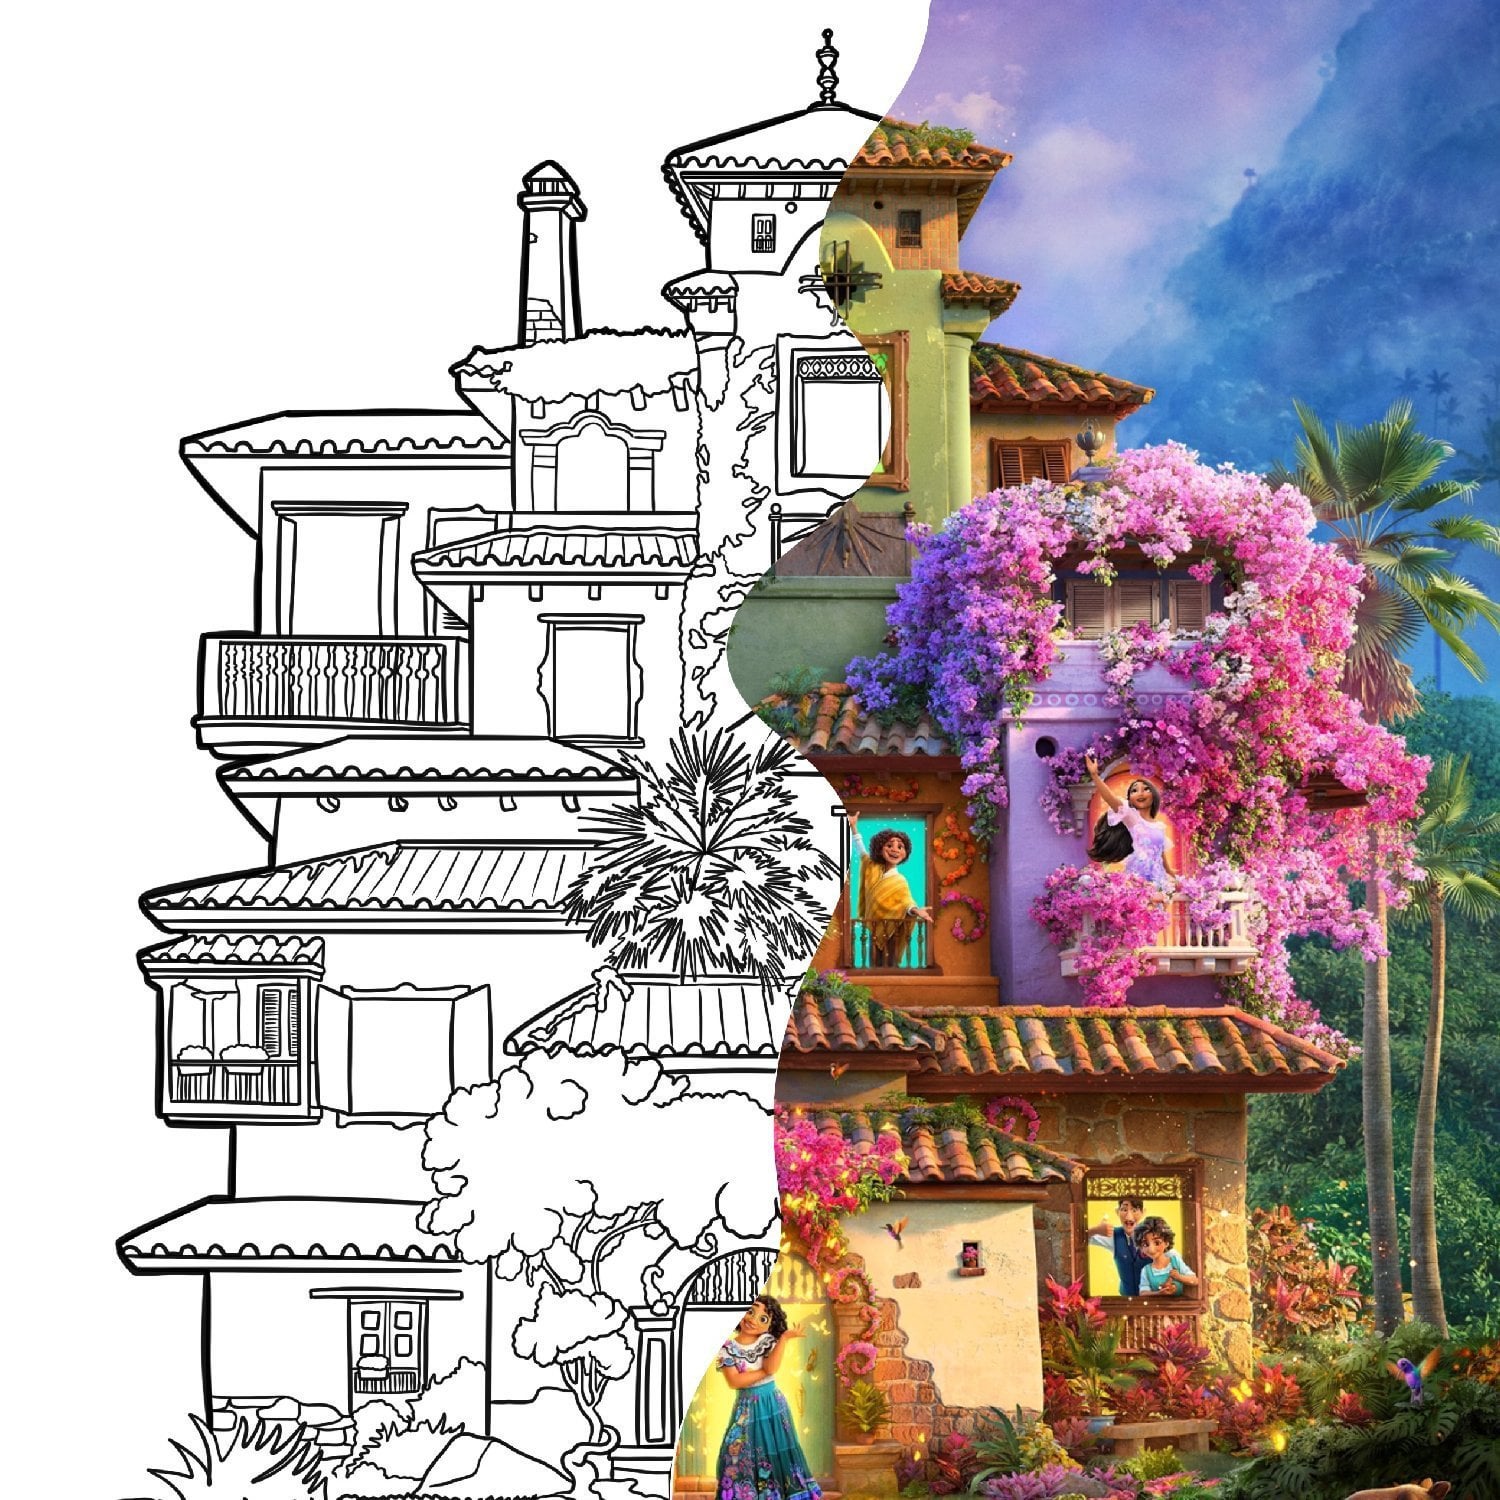 Madrigal house encanto coloring page free printable rfreecoloringforkids